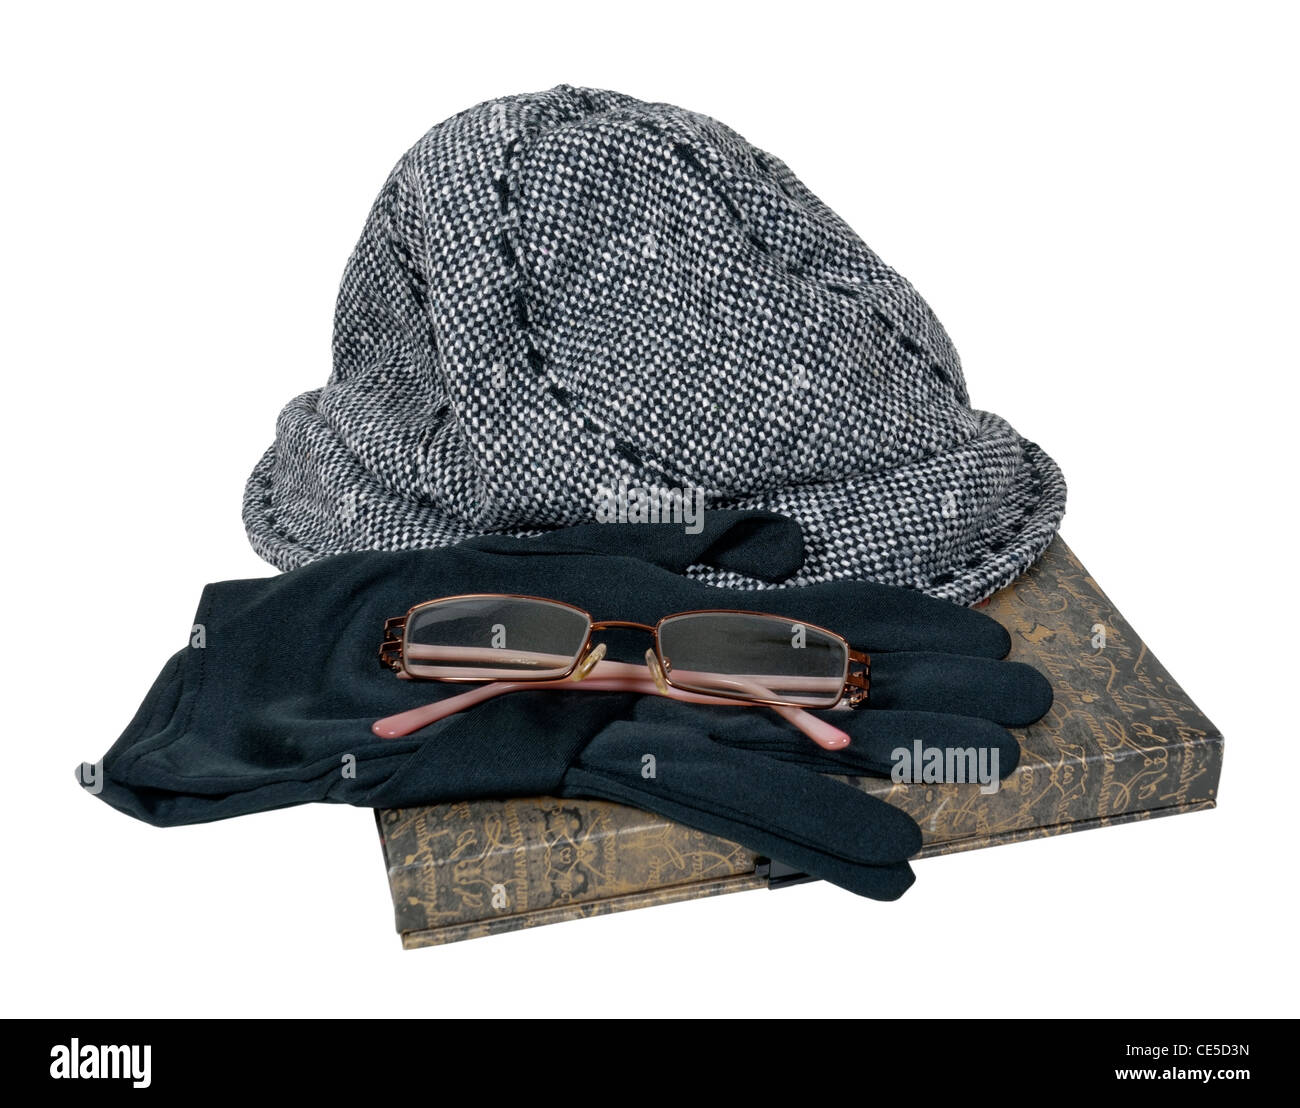 Tweed hat with black gloves and glasses on a book - path included Stock Photo